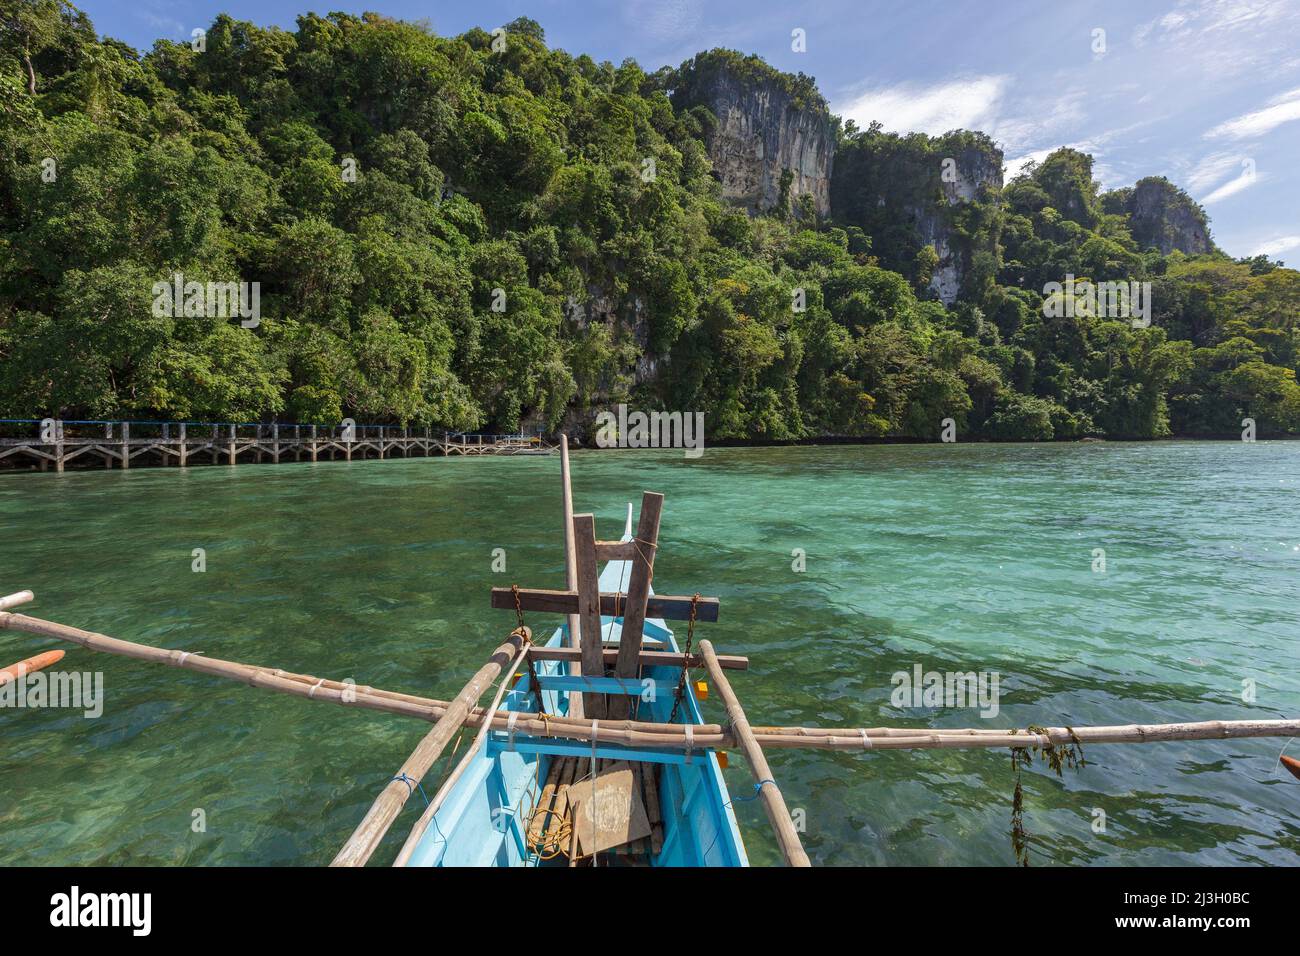 Philippines, Palawan, Quezon, Tabon Caves Complex and Lipuun Point Reservation, arrival by outrigger canoe on the site gathering many prehistoric caves Stock Photo